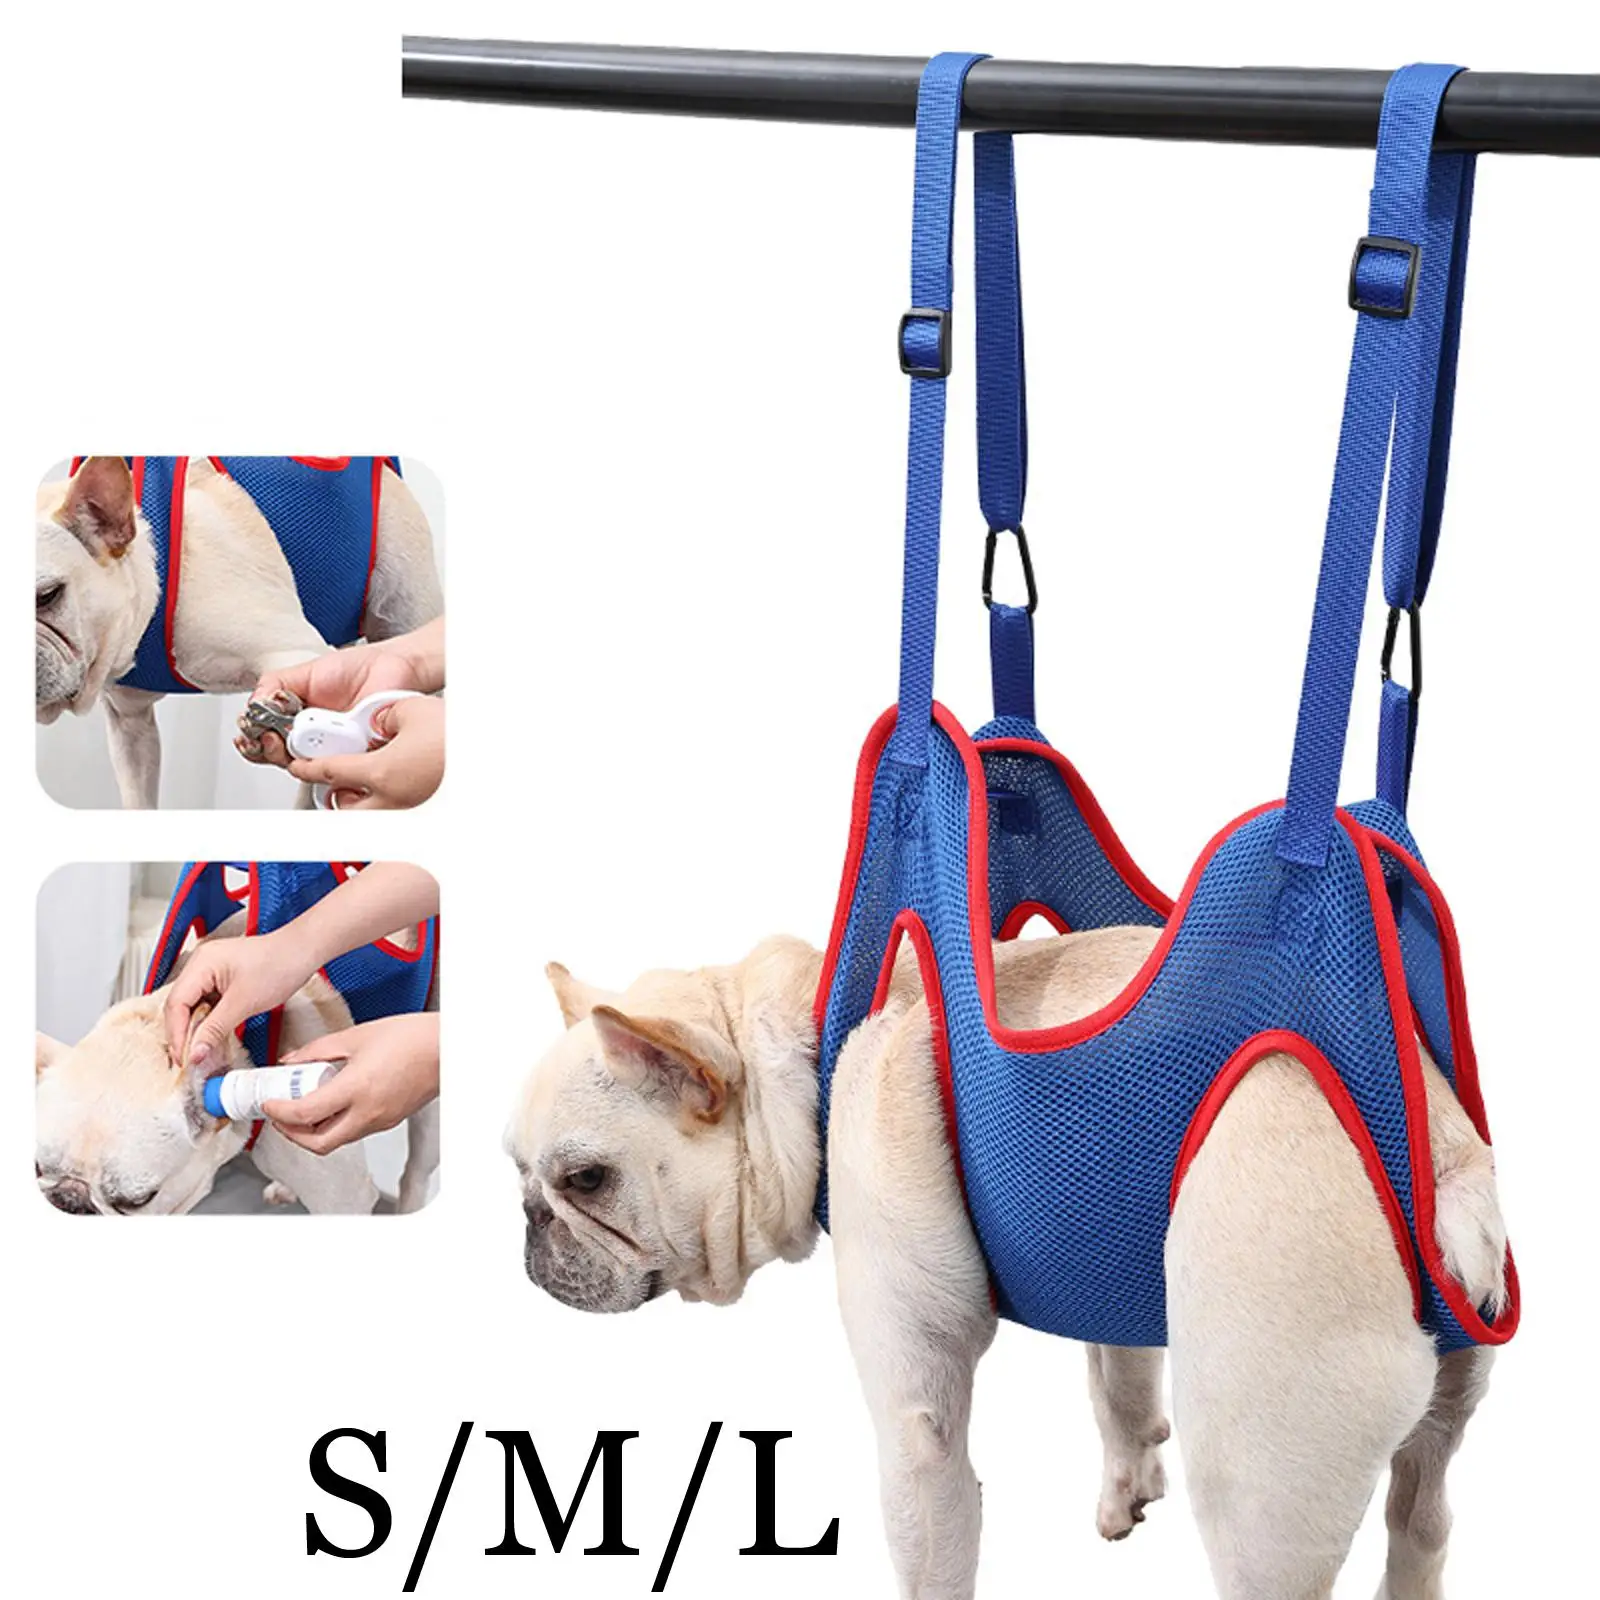 Multi Functional Pet Grooming Hammock Harness Portable for Ears Cleaning